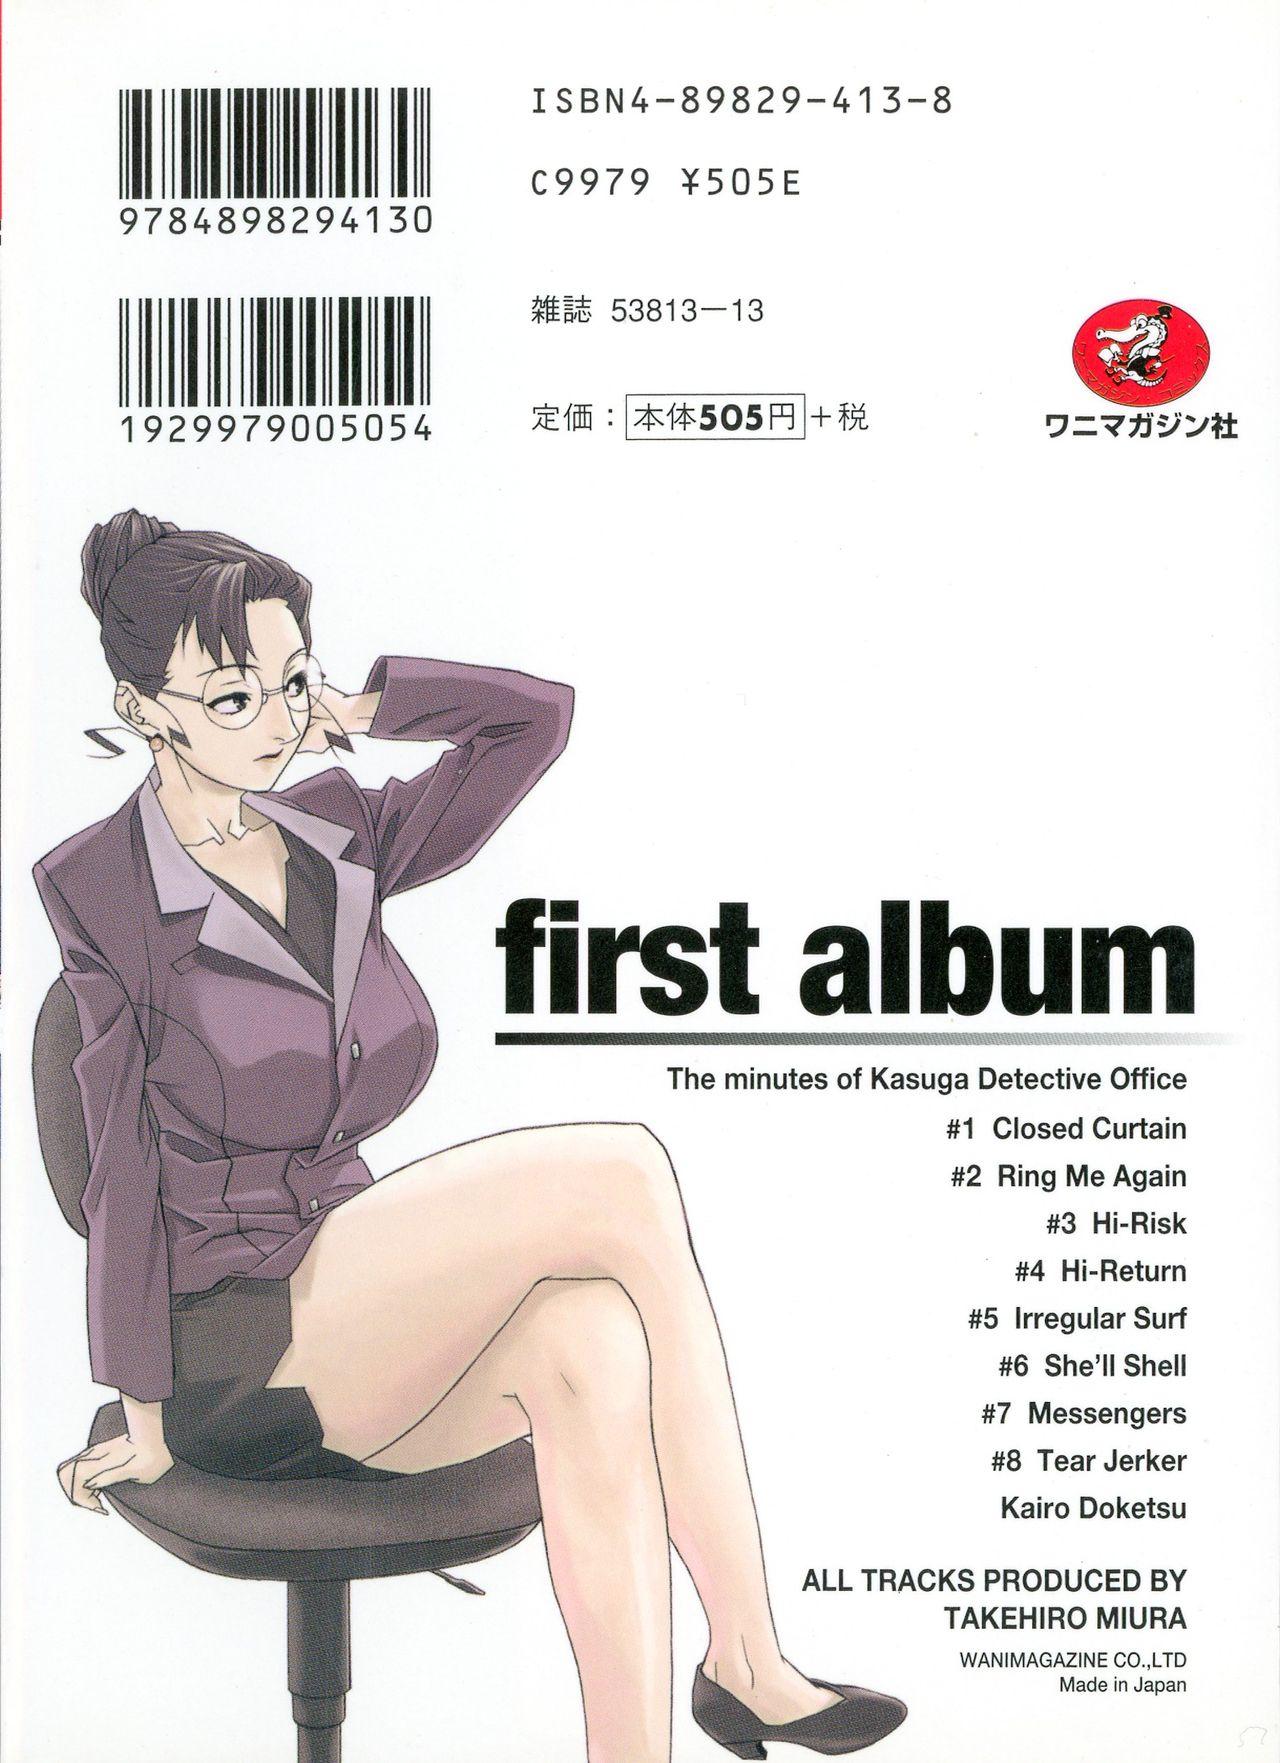 First Album - The minutes of Kasuga Detective Office 1